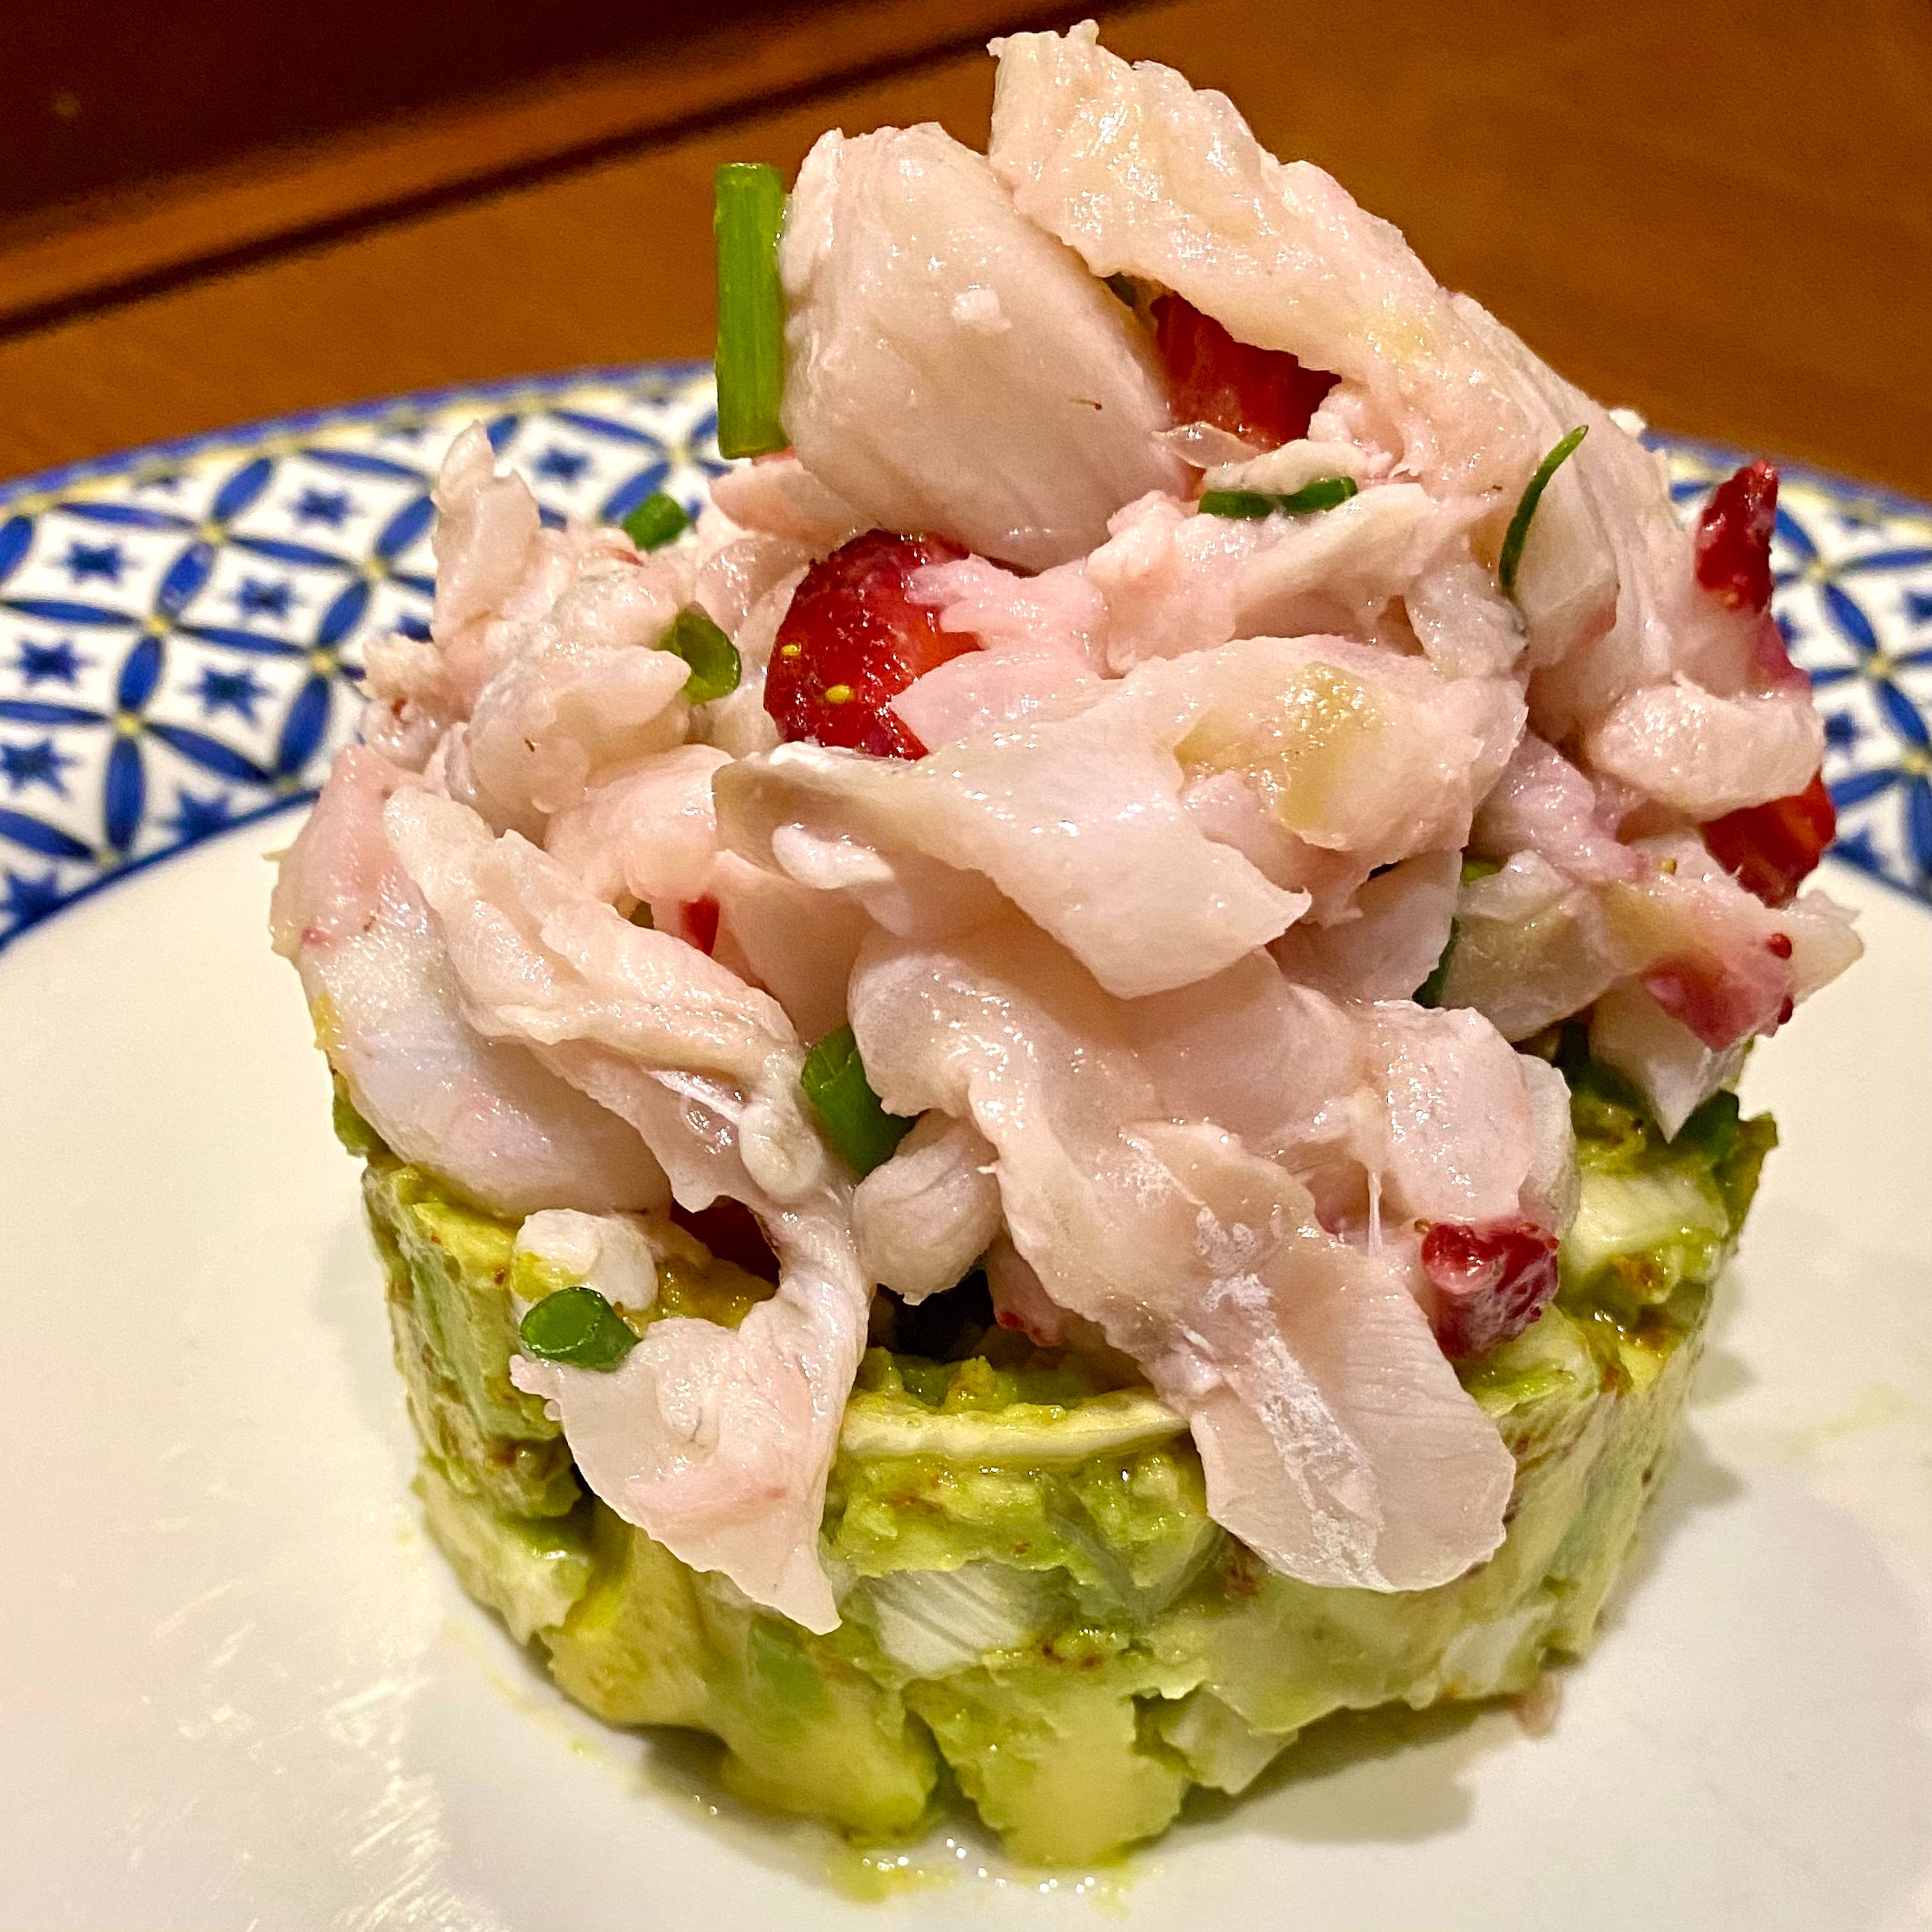 Set the avocado and fennel tartare on the bottom and top with the ceviche. Sprinkle with chives and enjoy!